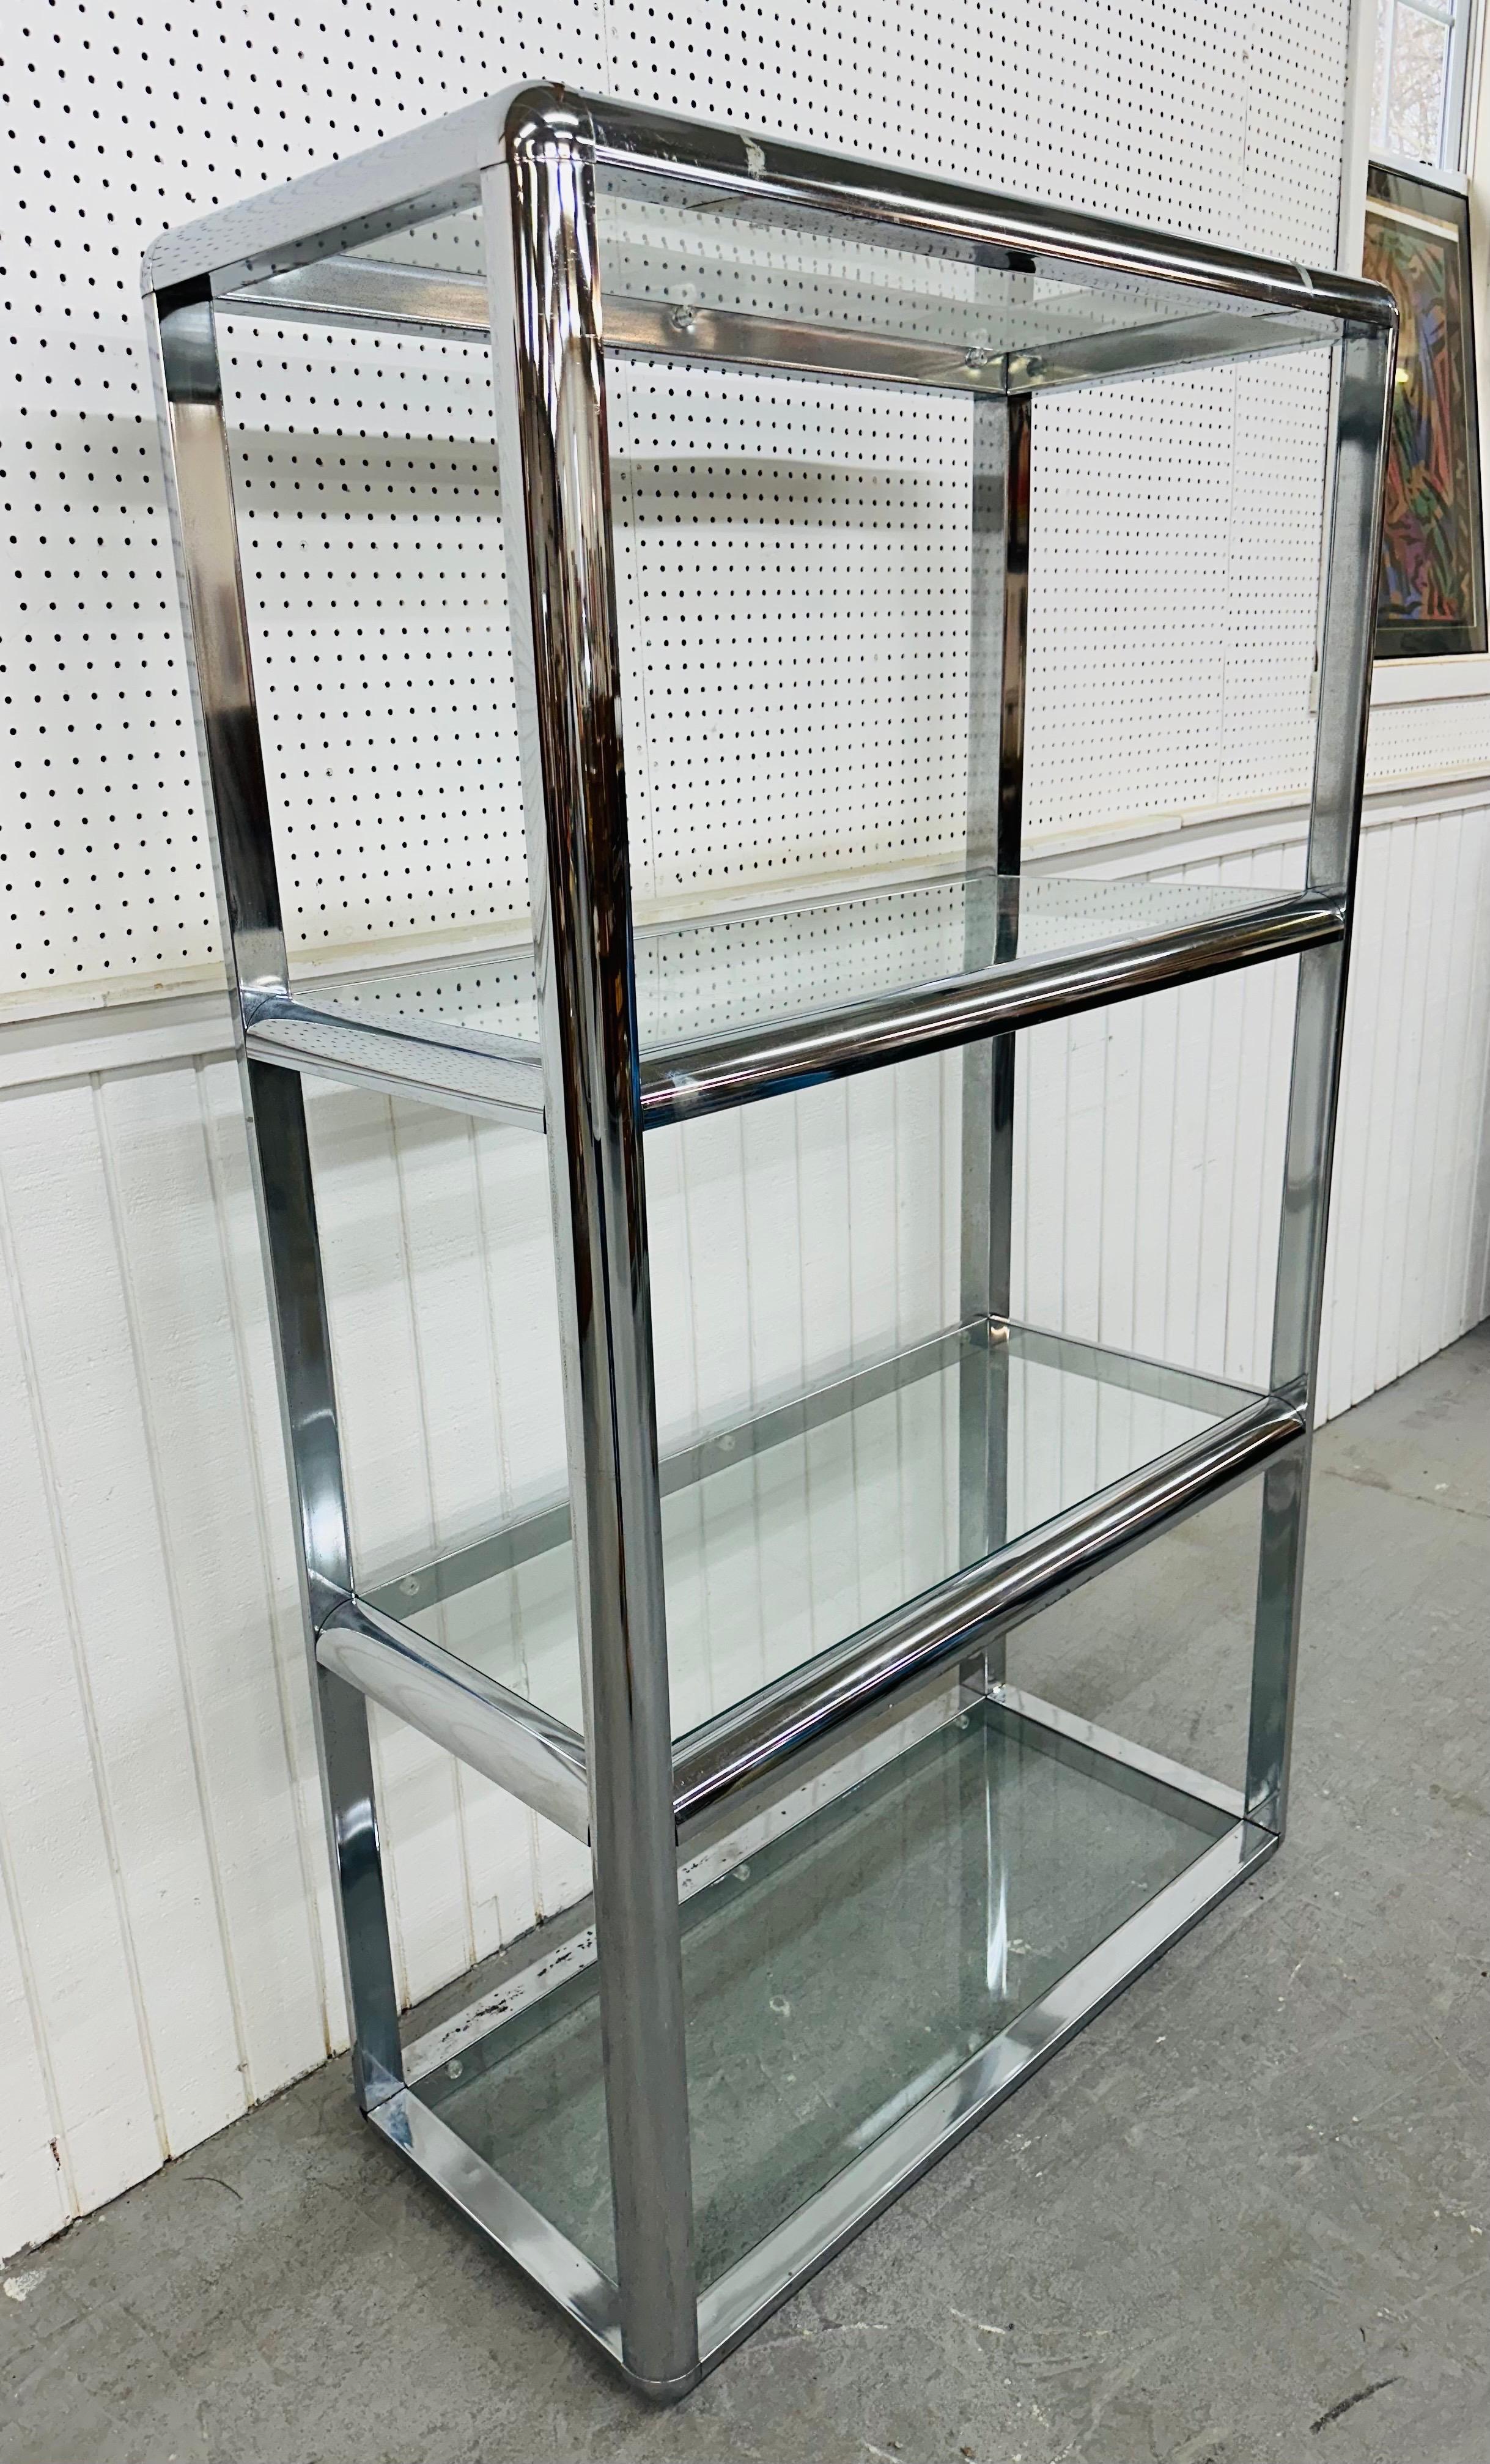 This listing is for a Vintage Milo Baughman Style Chrome Etagere. Featuring a straight line design, flat bar chrome frame, and four glass shelves to display items. This is an exceptional combination of quality and design in the style of designer